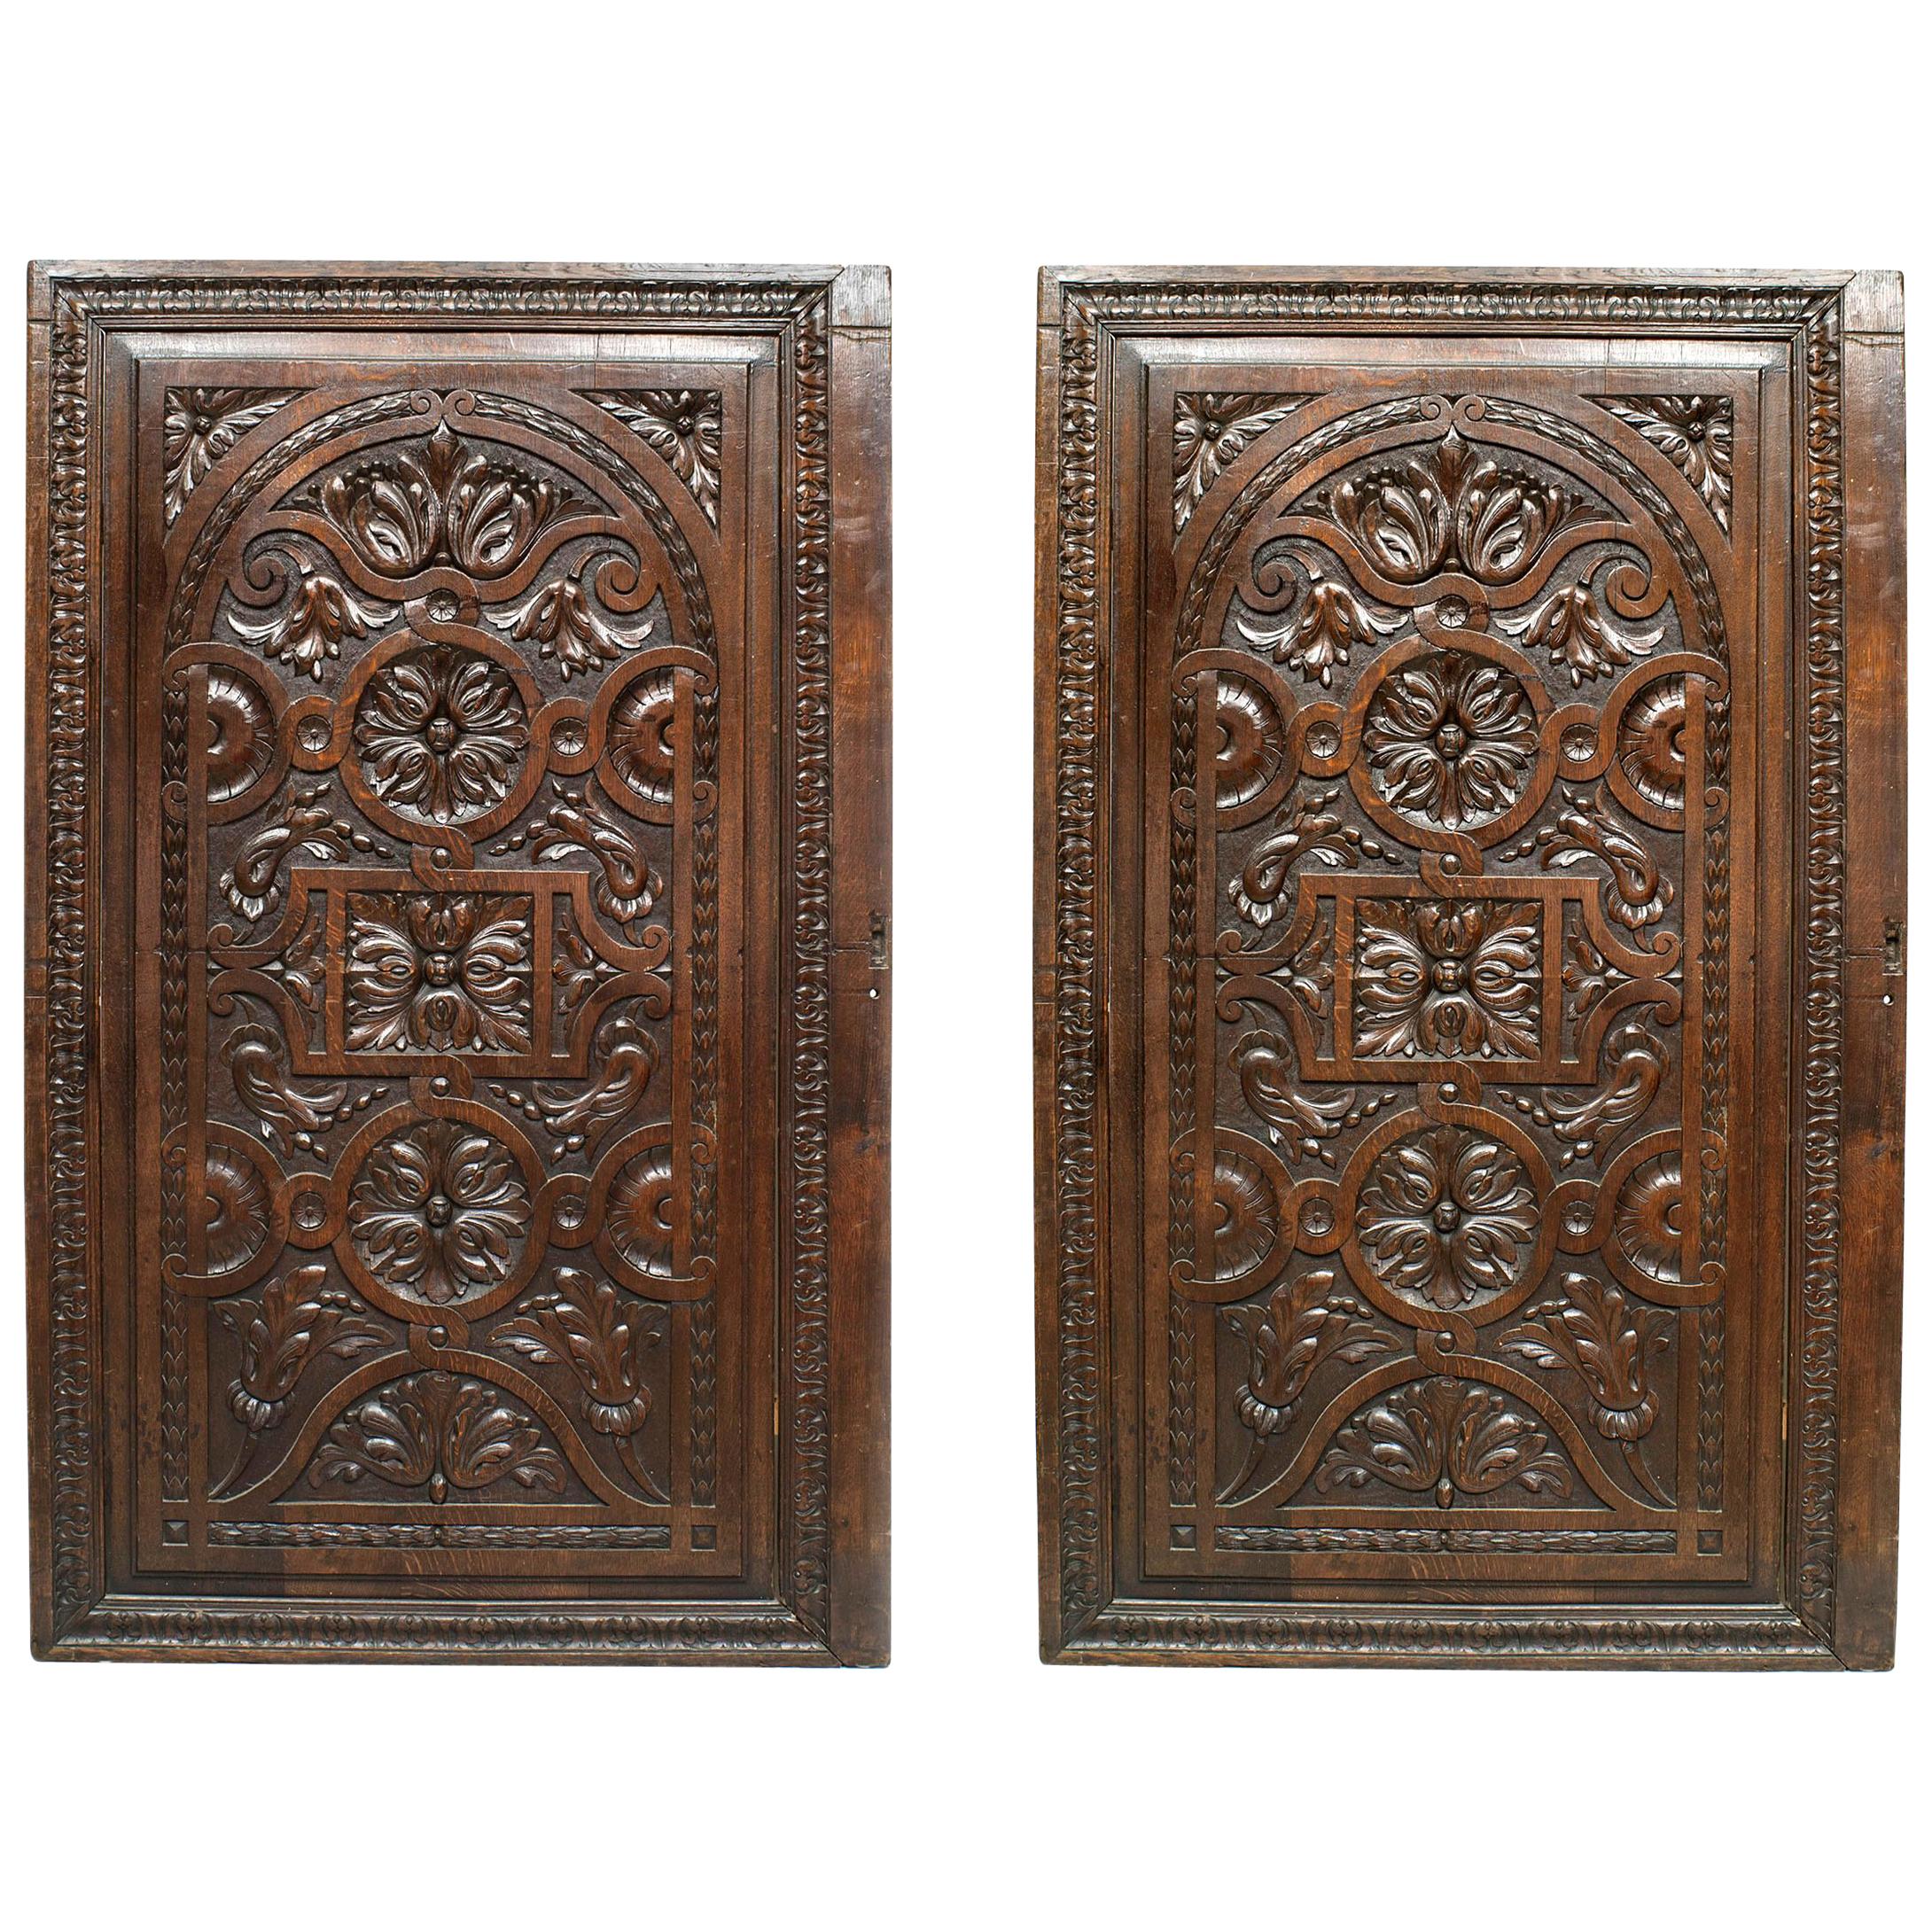 Pair of English Renaissance Style Carved Walnut Panels For Sale at